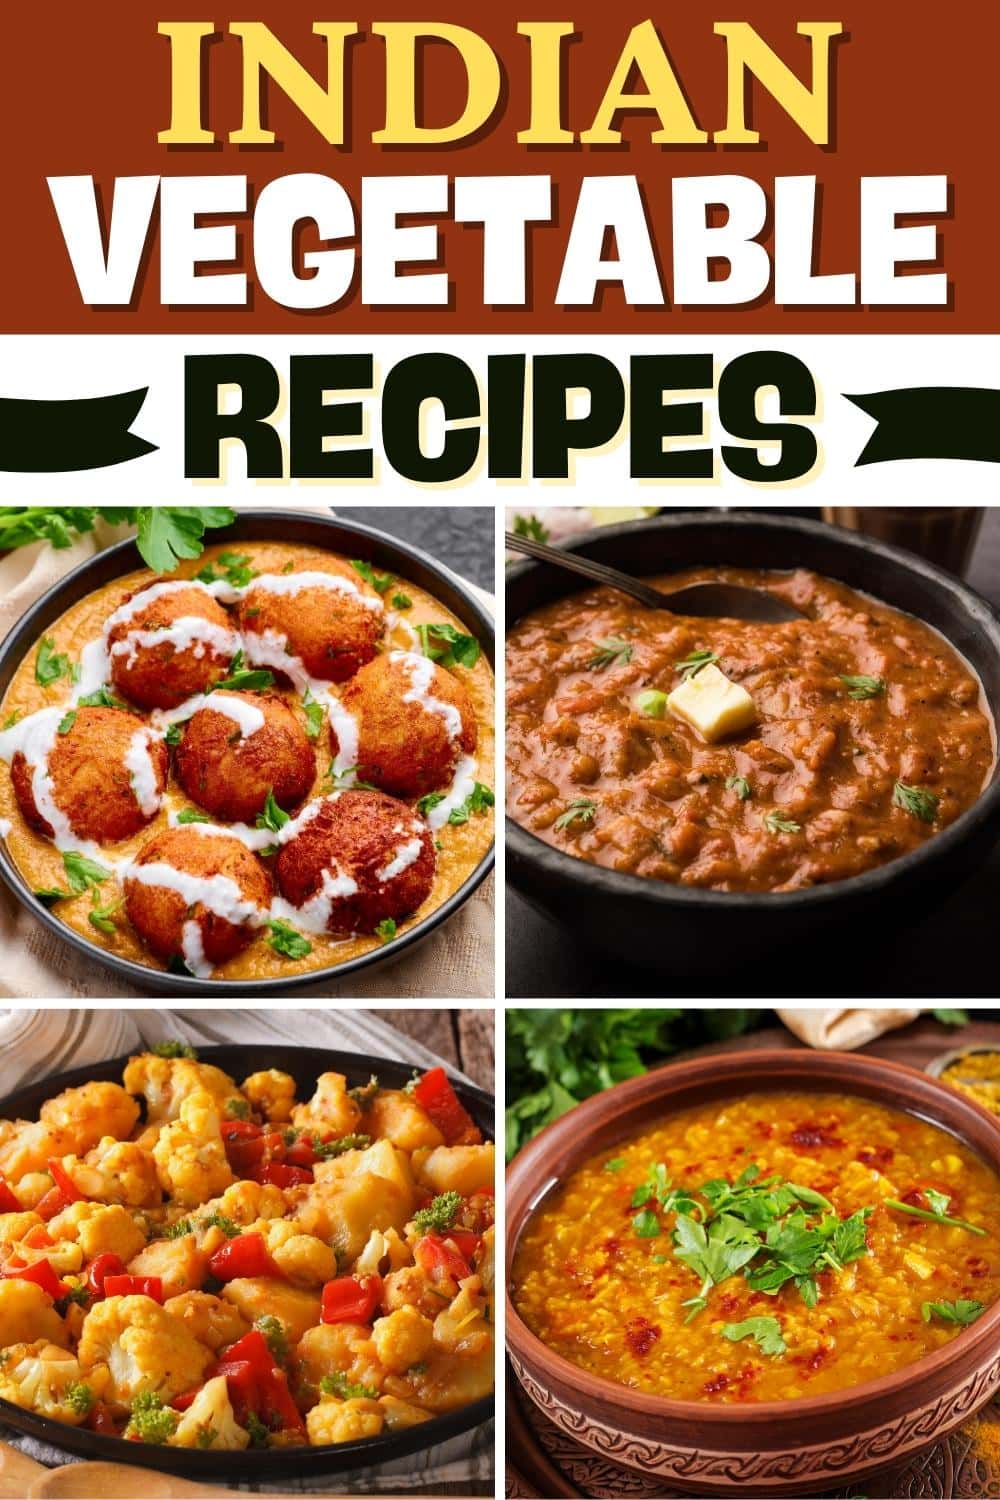 25 Best Indian Vegetable Recipes - Insanely Good